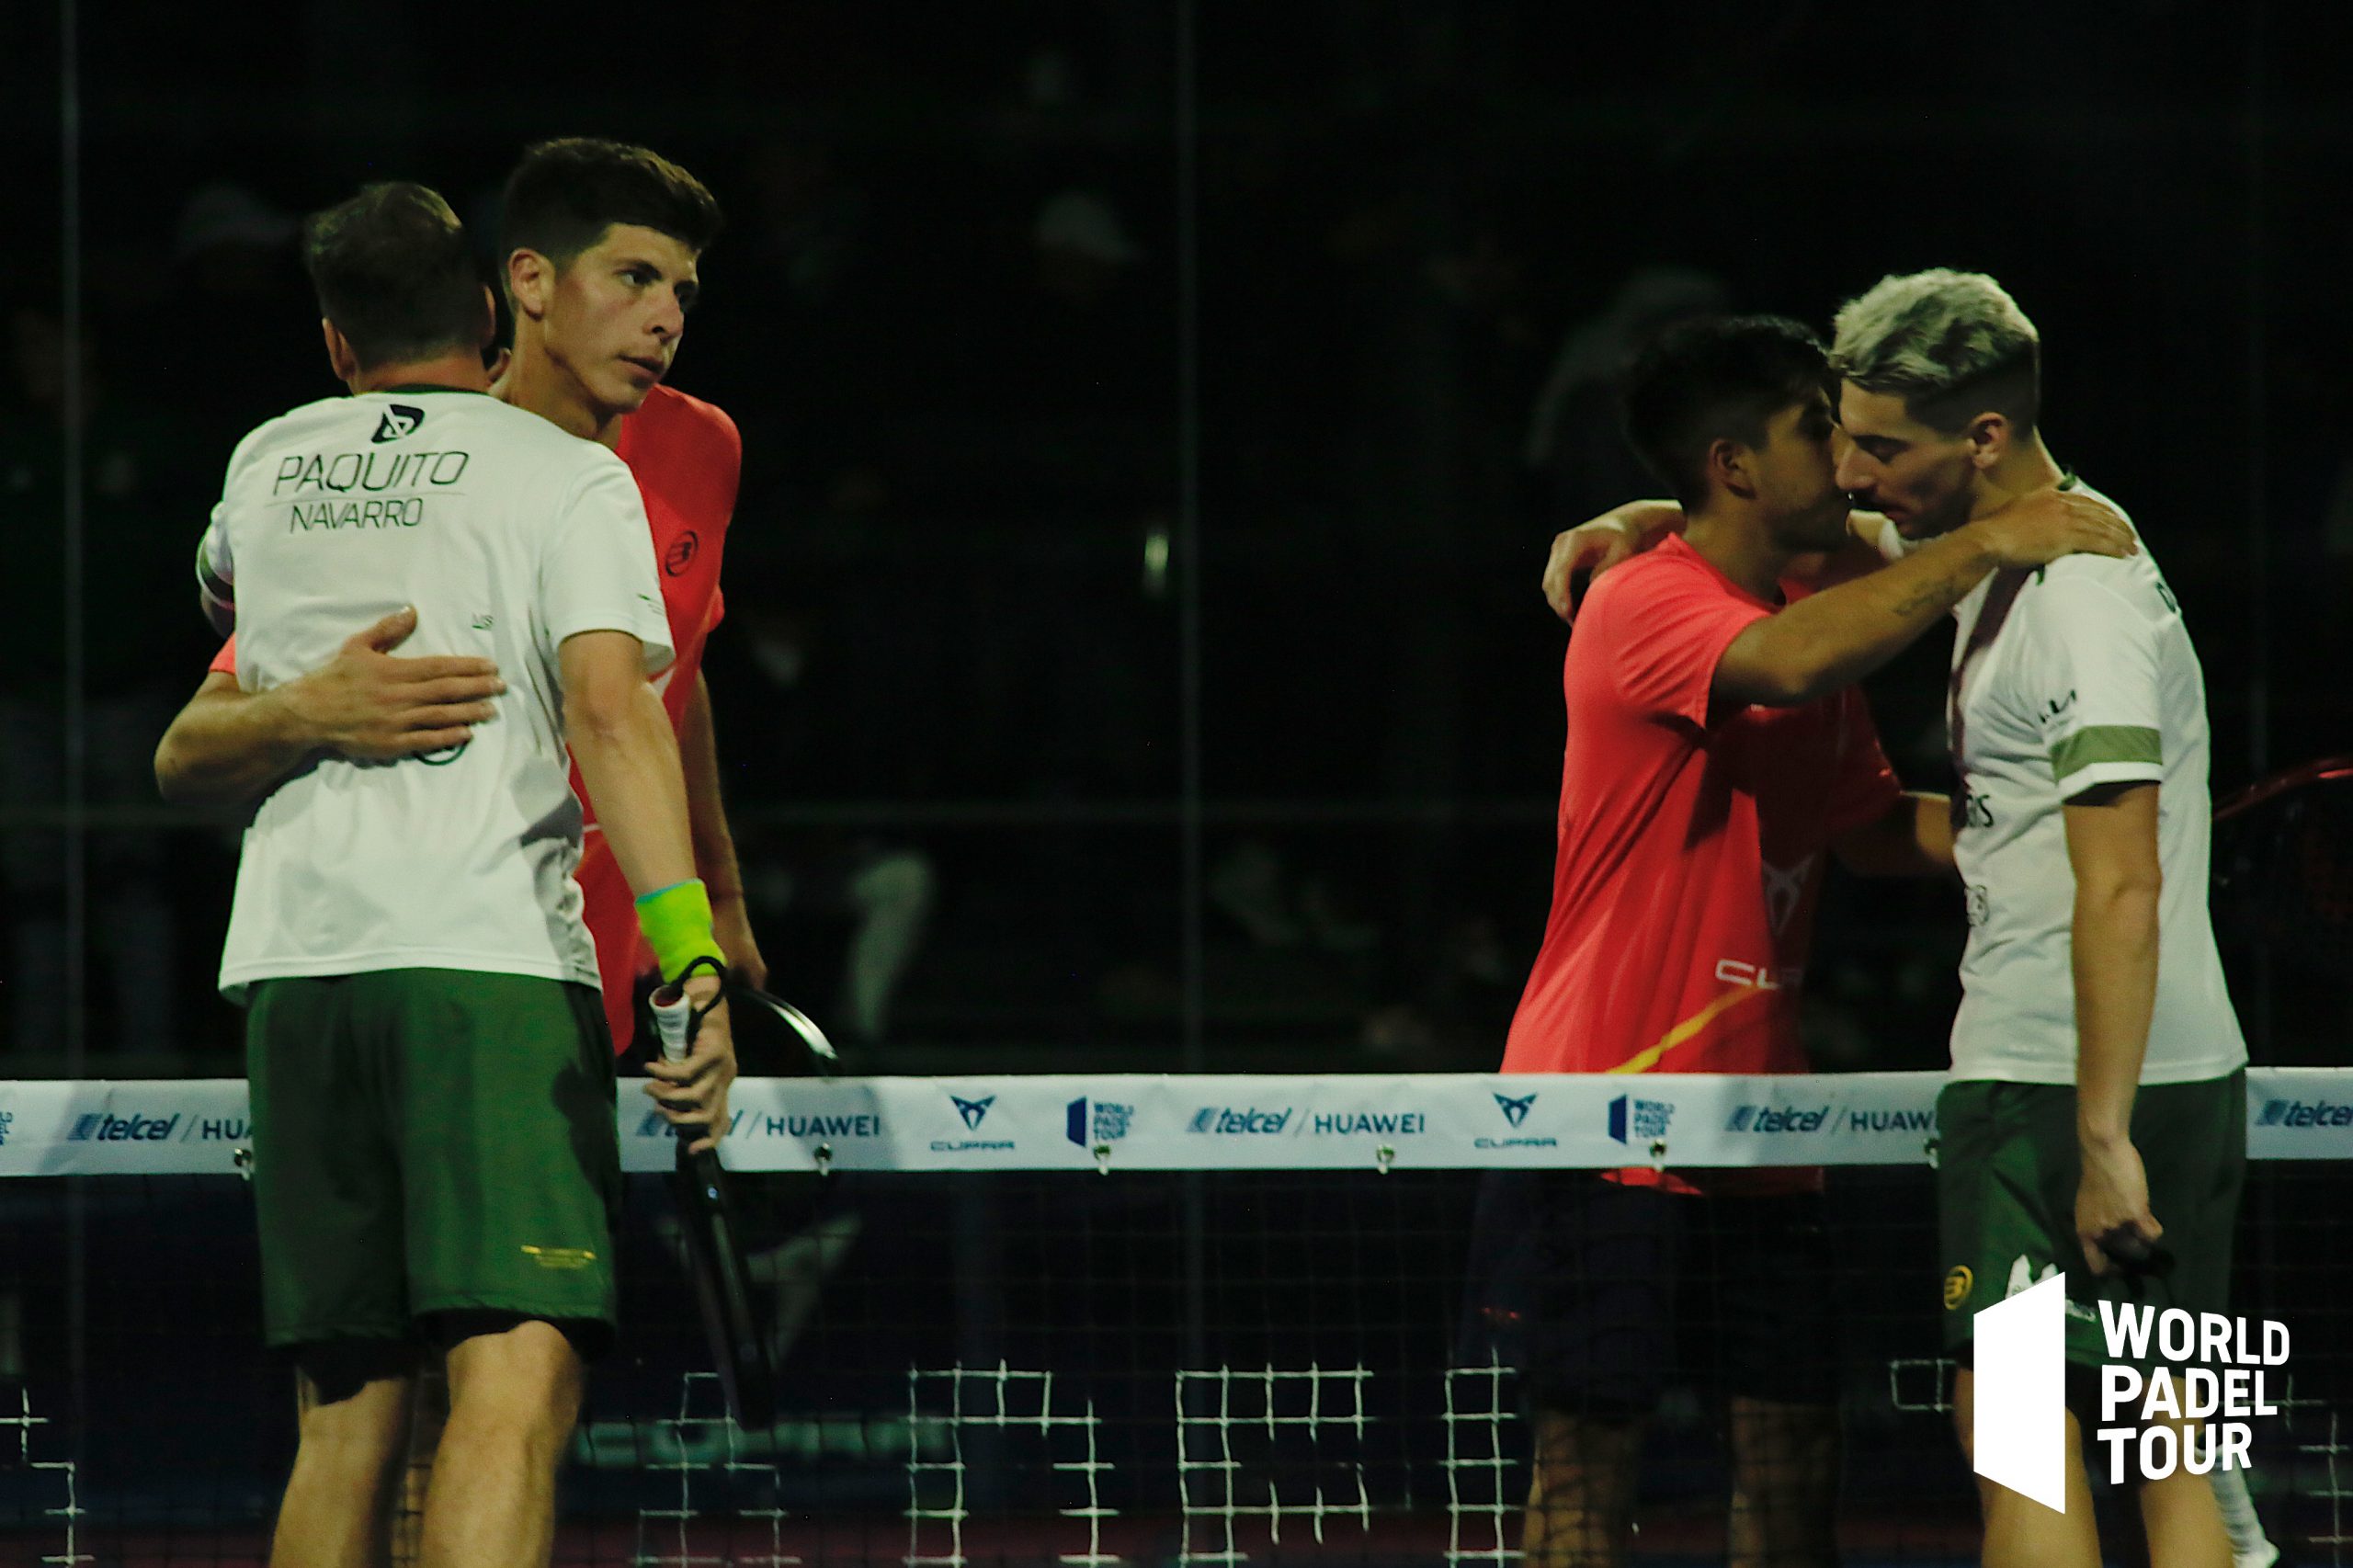 Watch: The longest point in World Padel Tour history